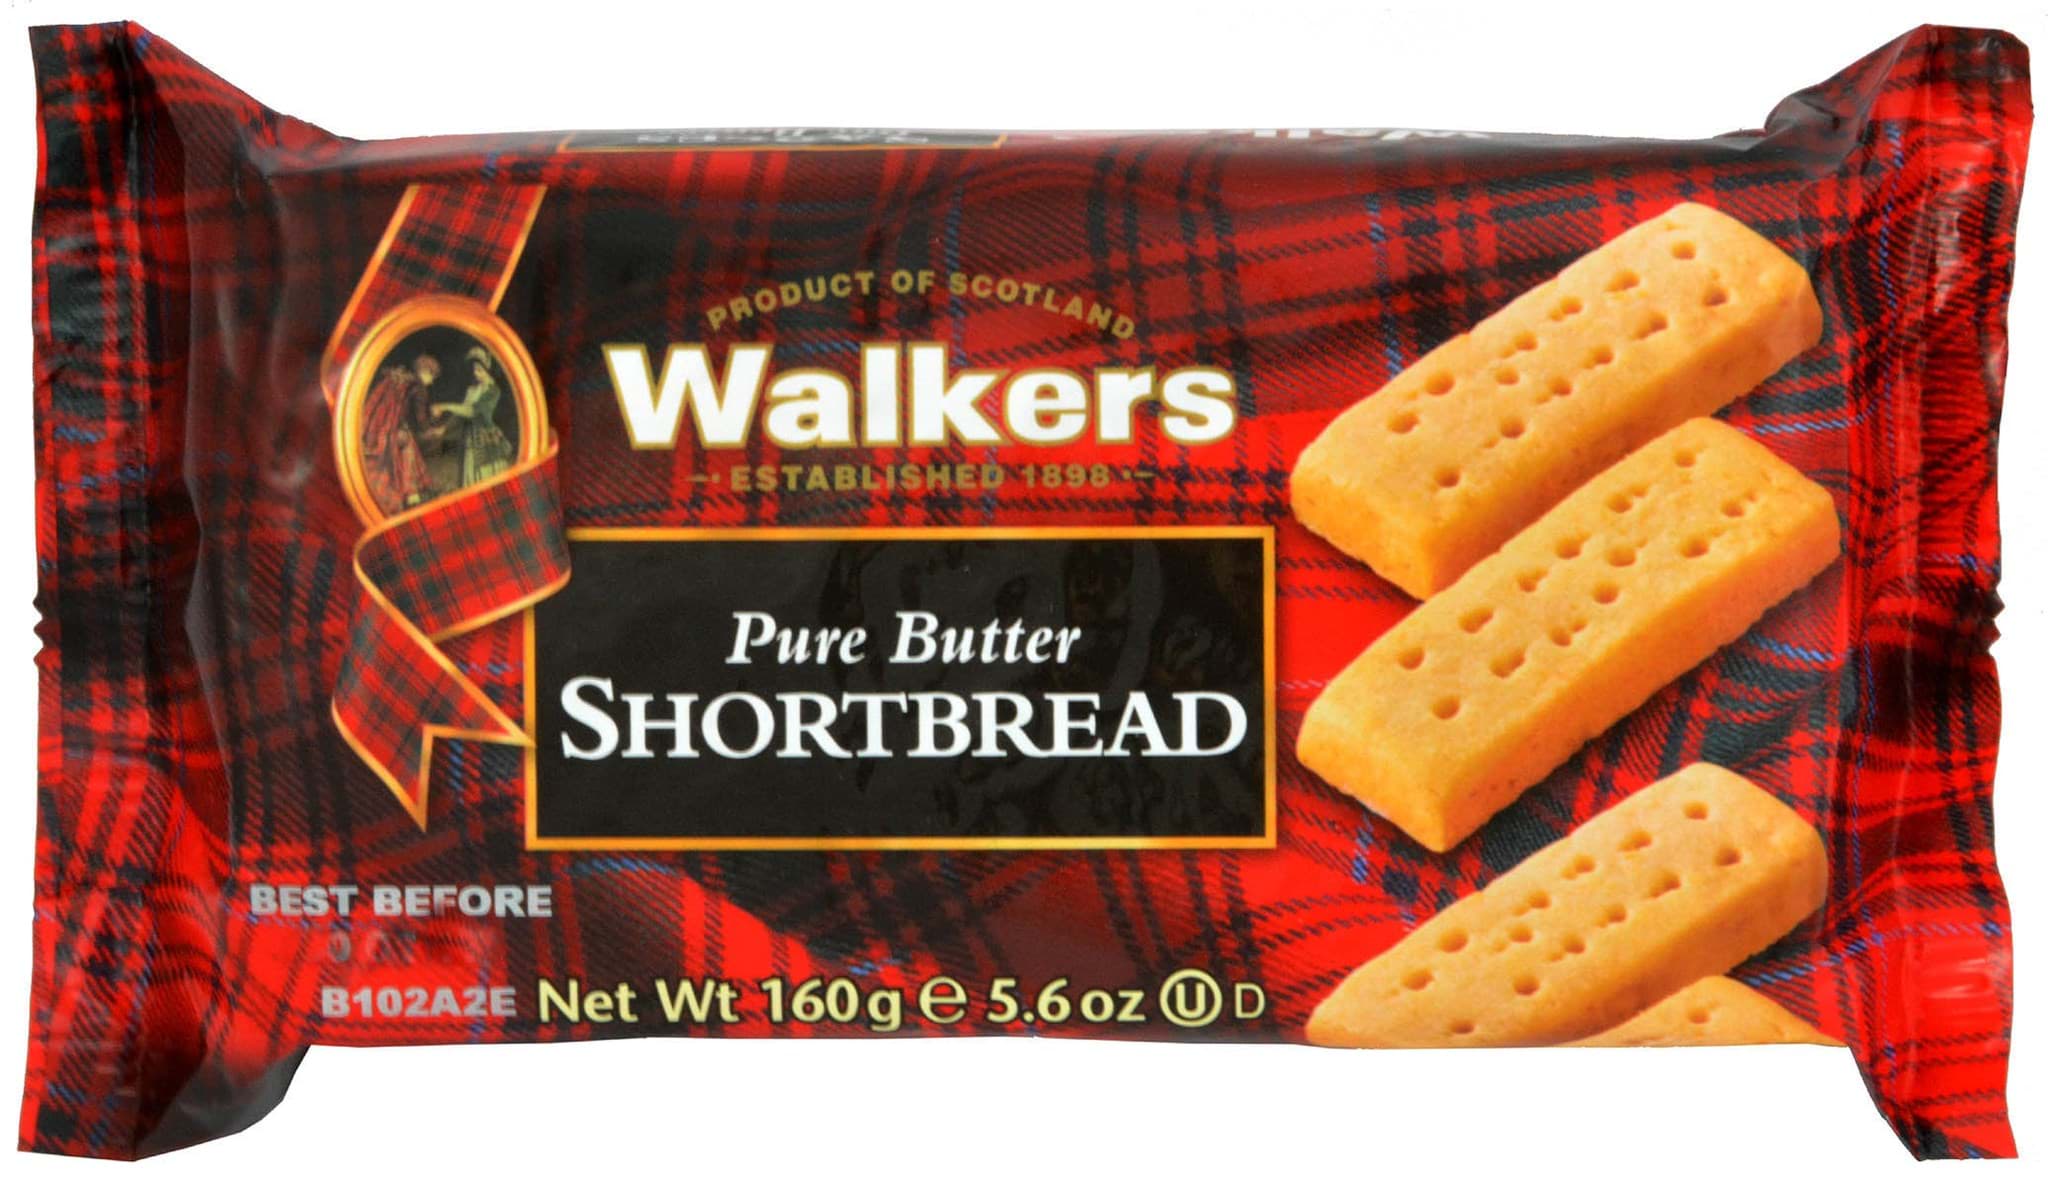 Picture of Walkers Shortbread Fingers 160g